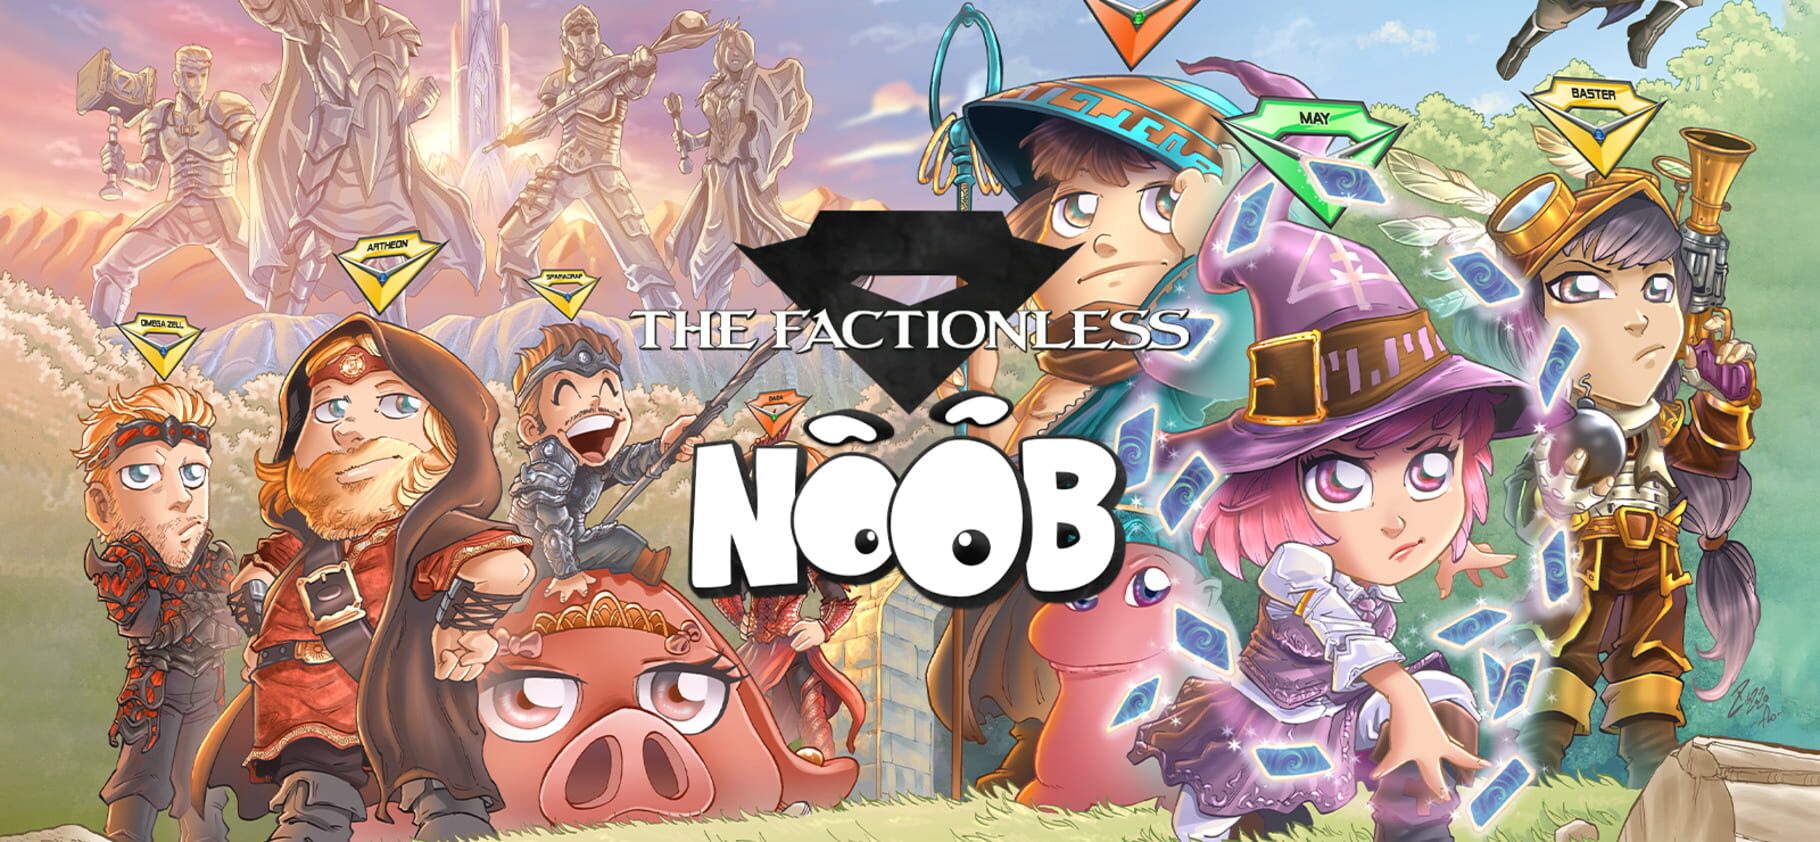 Noob: The Factionless artwork